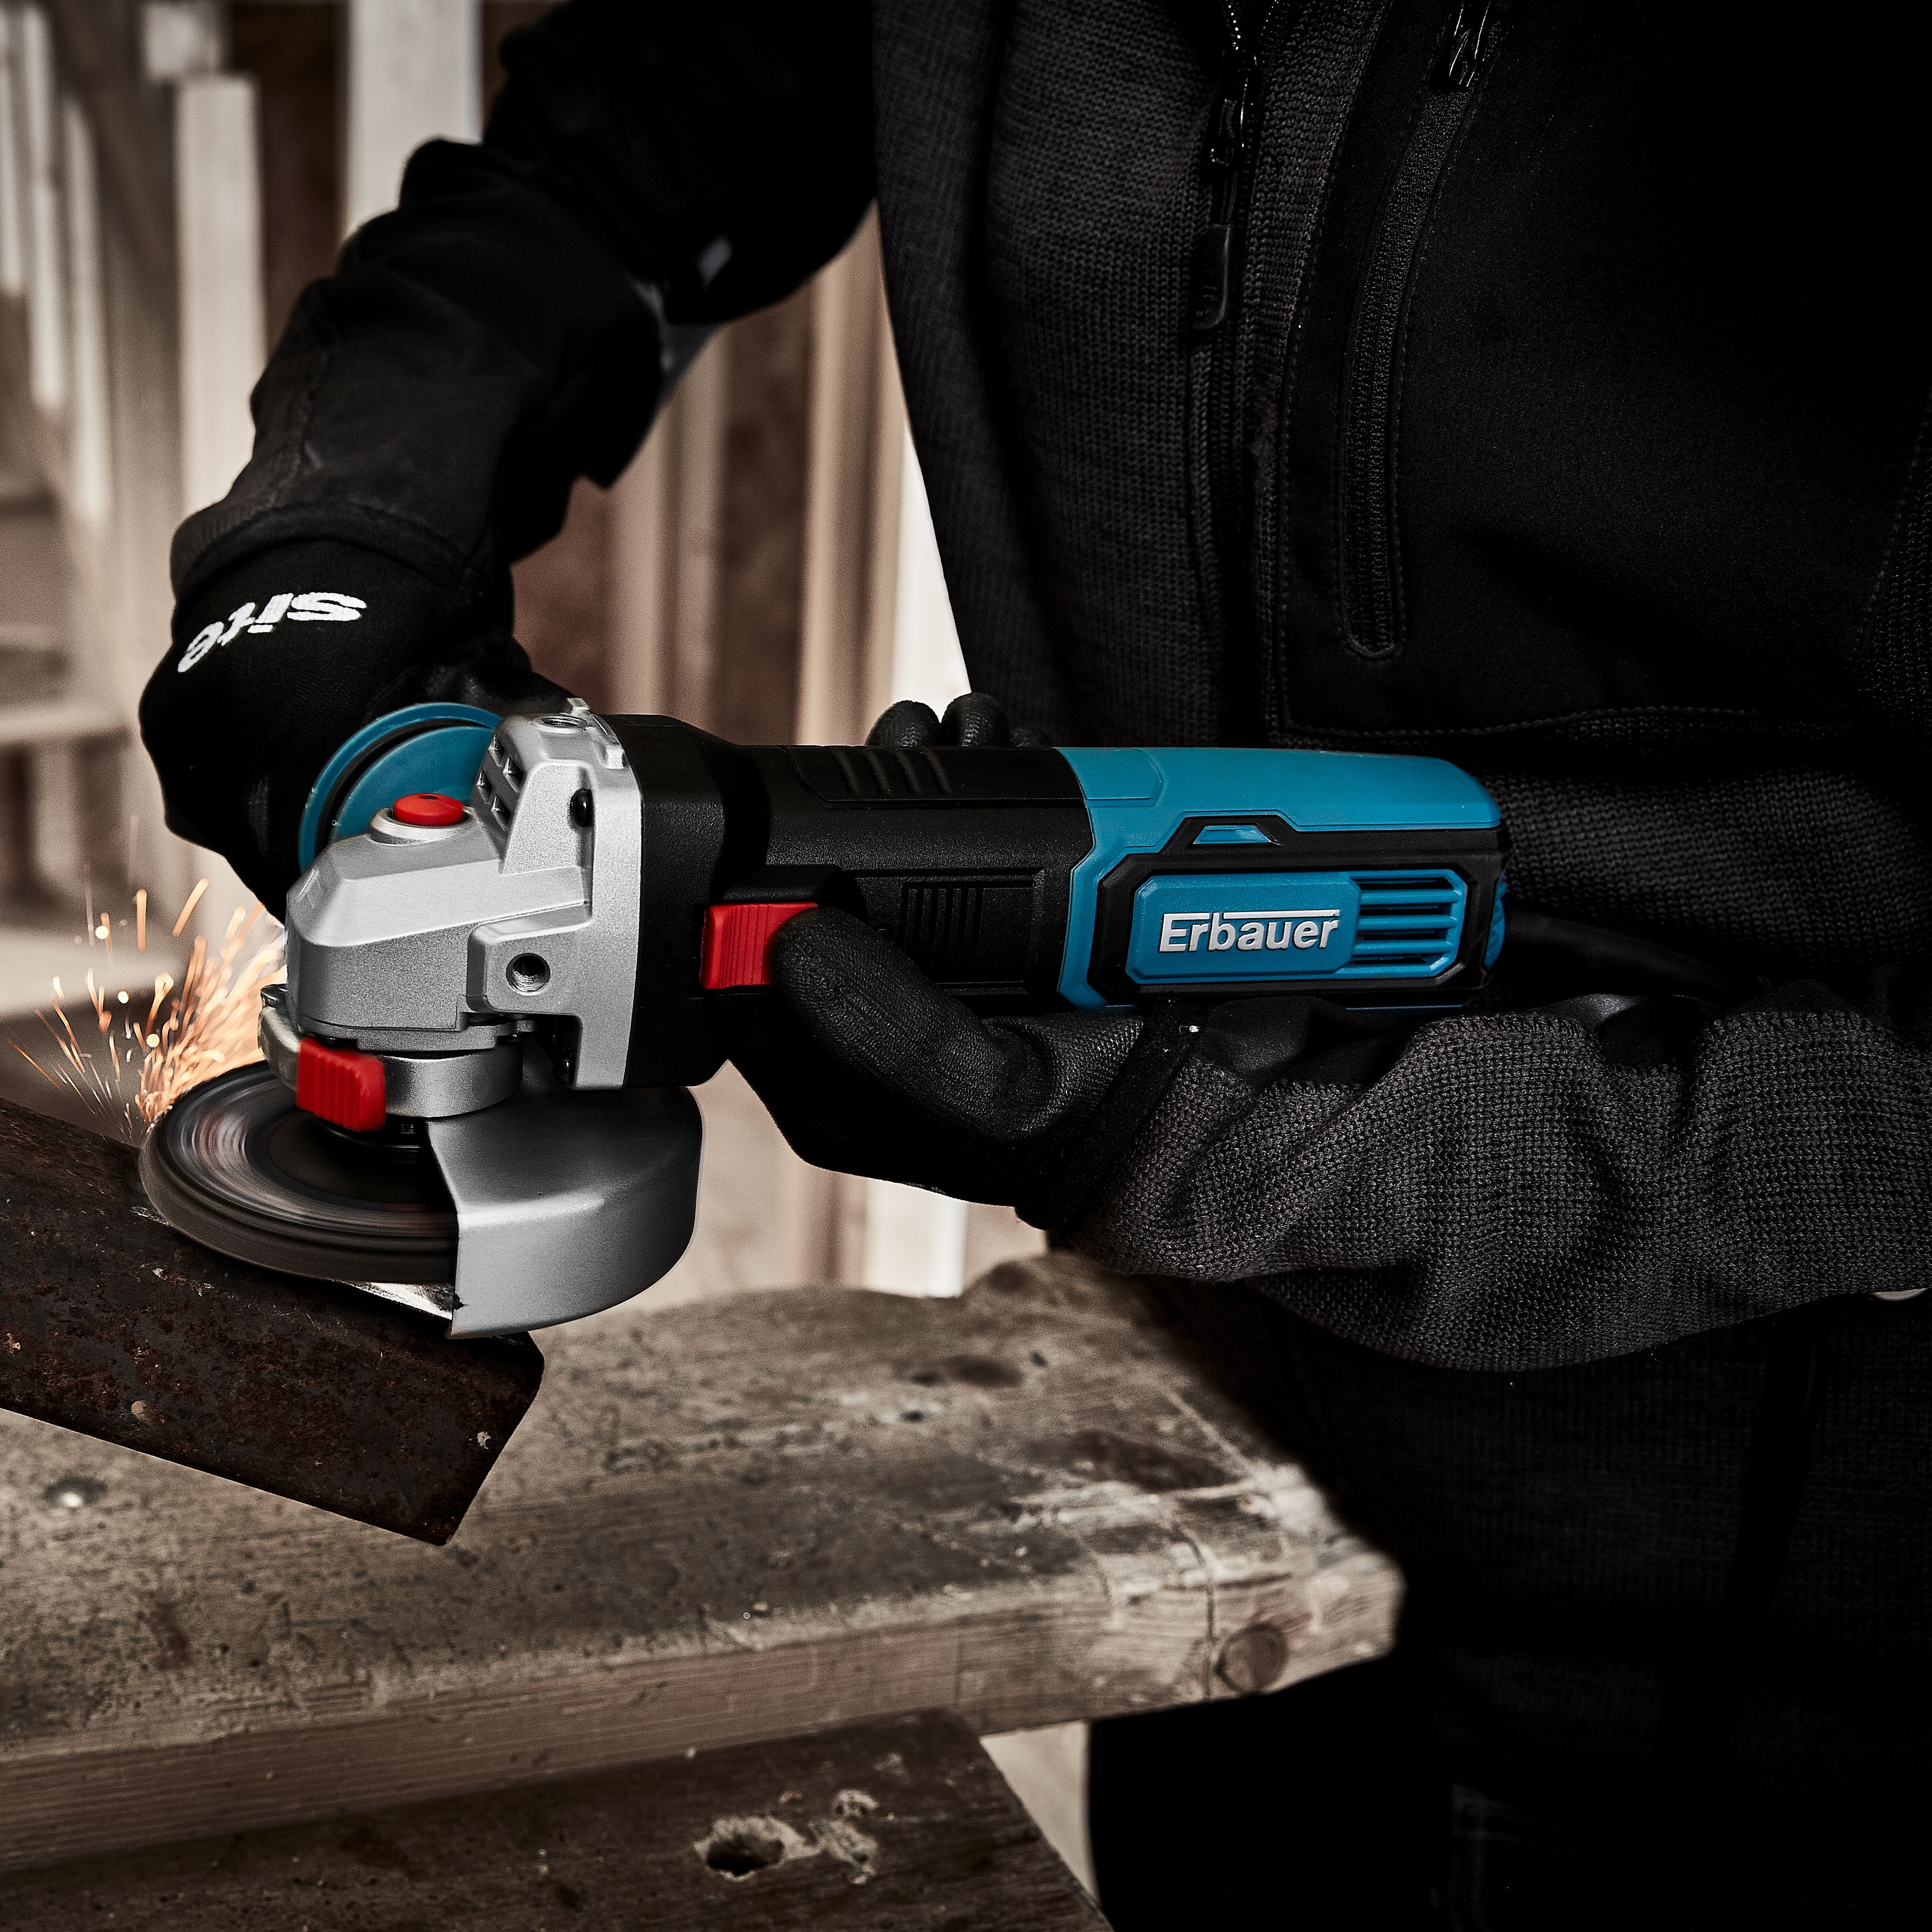 Erbauer 900W 240V 115mm Corded Angle grinder - EAG900-115